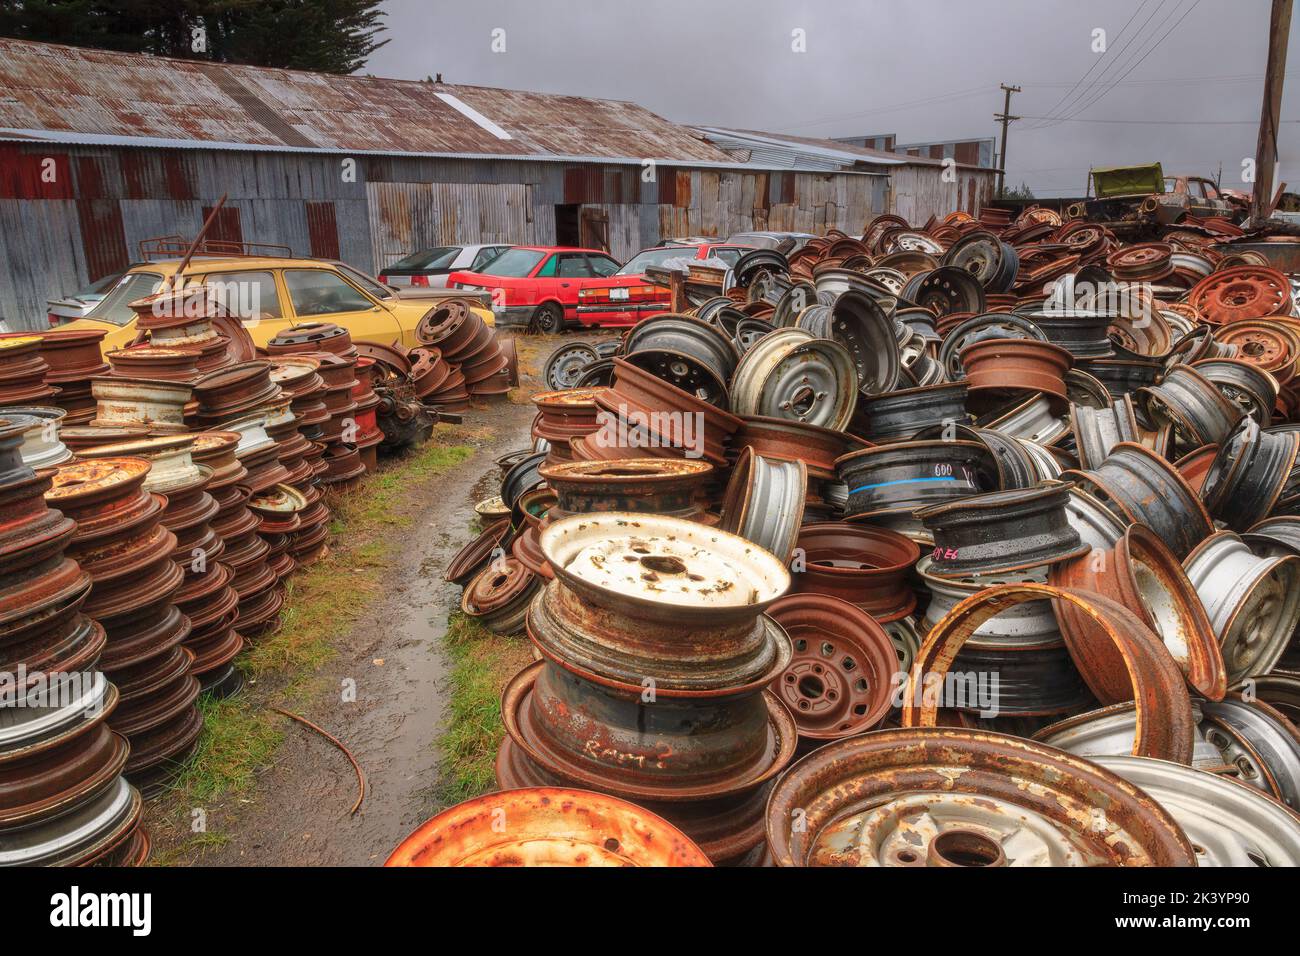 Piles of car wheels from scrapped automobiles at a wrecker's yard. 'Smash Palace', Horopito, New Zealand Stock Photo